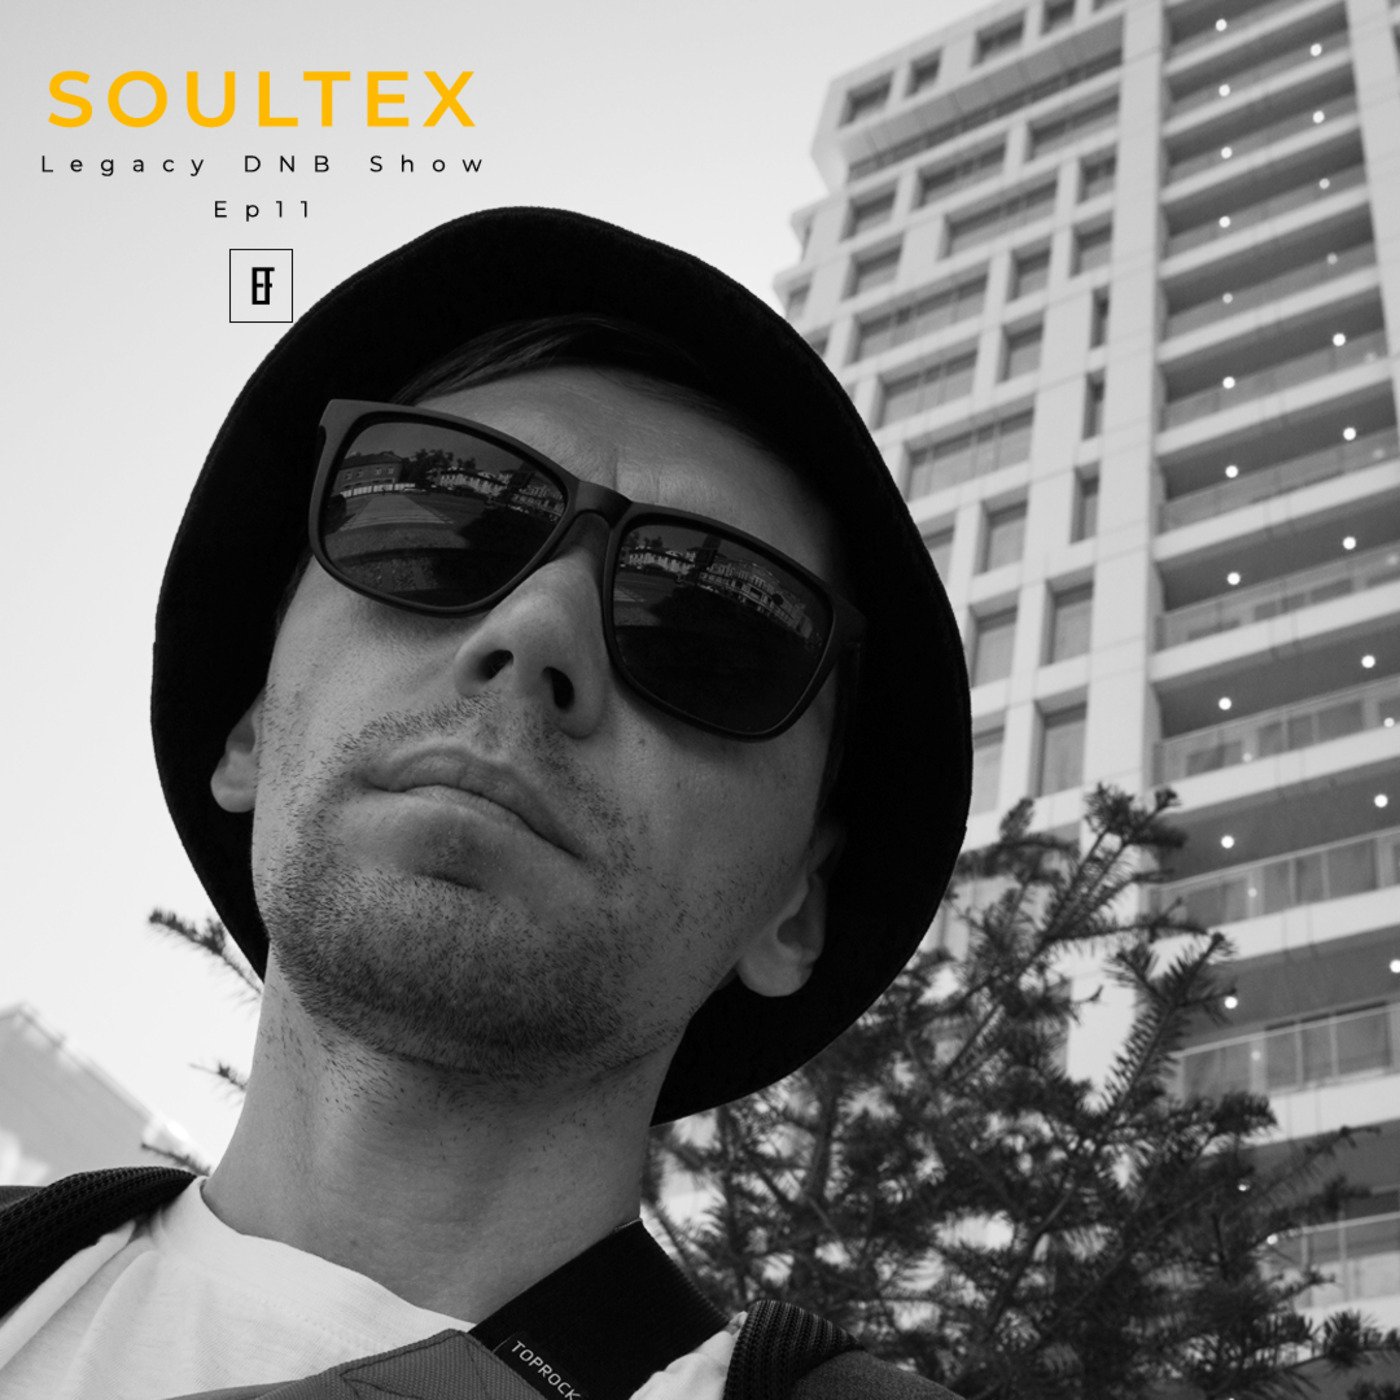 Soultex - Legacy DNB Show Ep11 // East Forms Drum & Bass